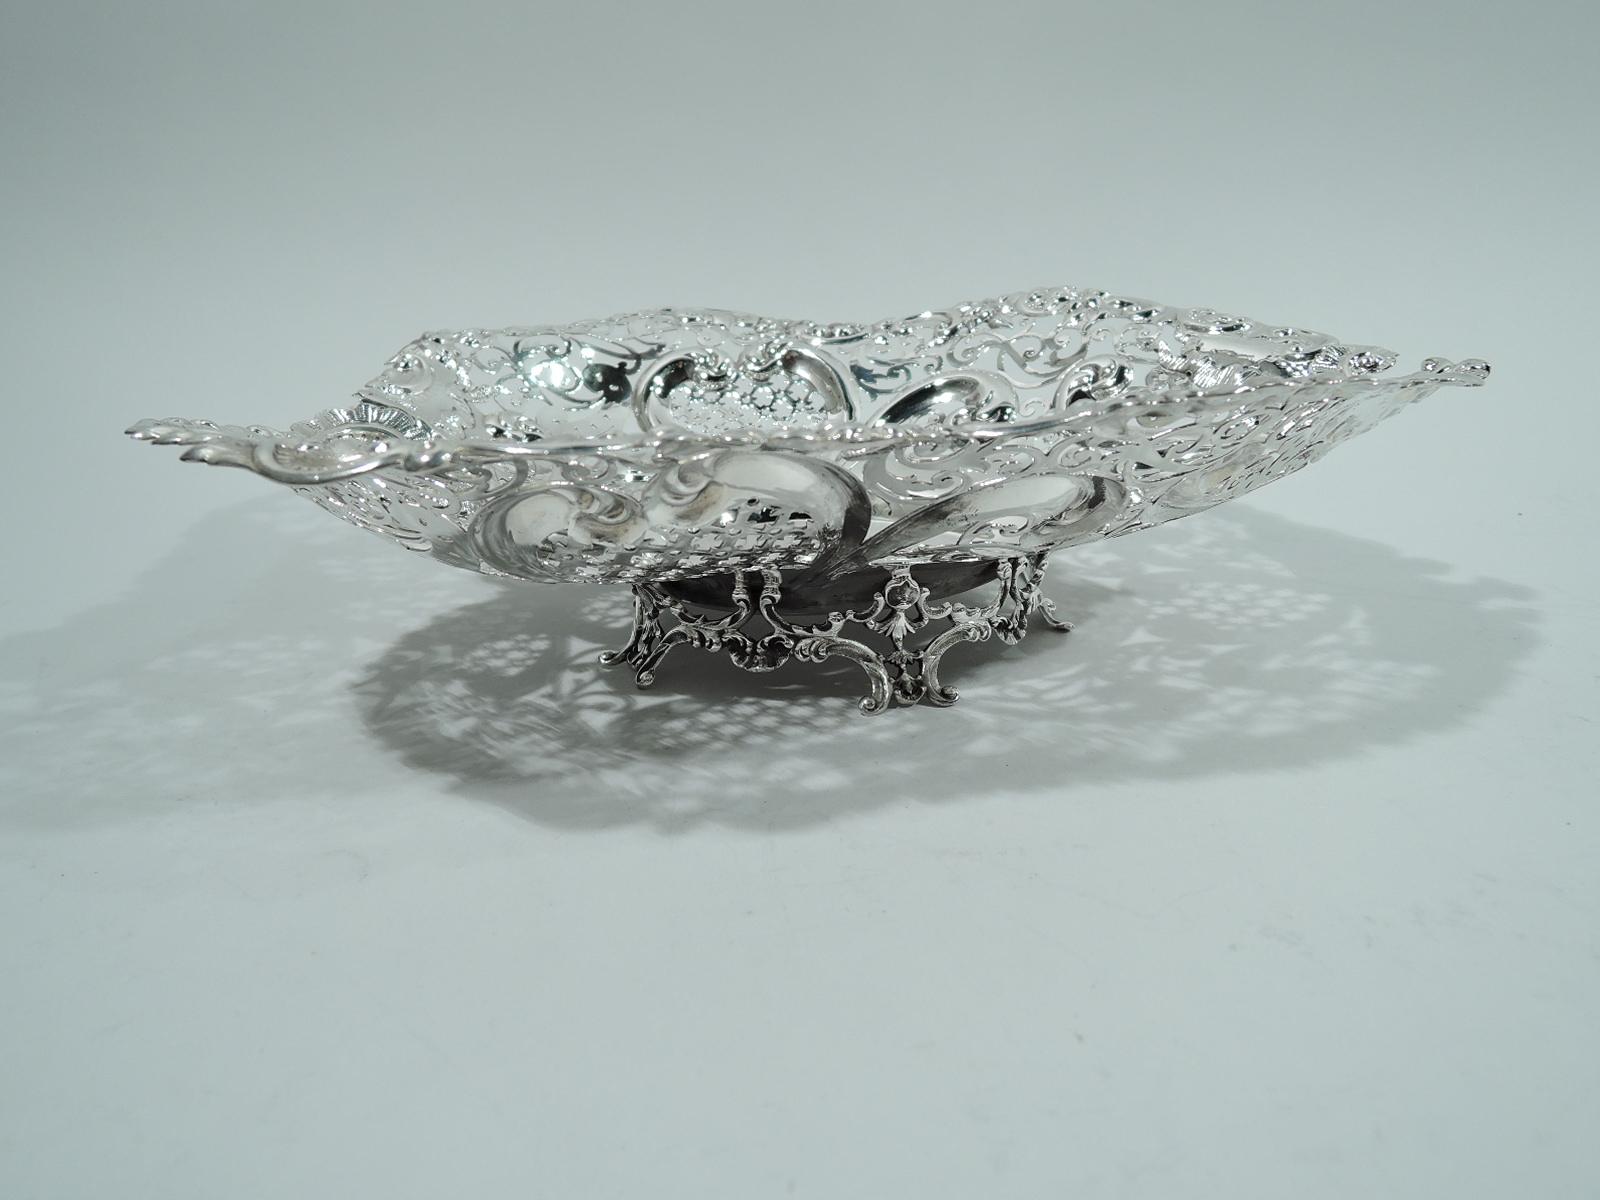 Super big and super romantic sterling silver heart bowl. Made by Gorham in Providence in 1910. Solid well; curved and tapering sides with chased scrolls and ribbon bows, and pierced geometric ornament. Irregular rim with scrolls, leaves, and